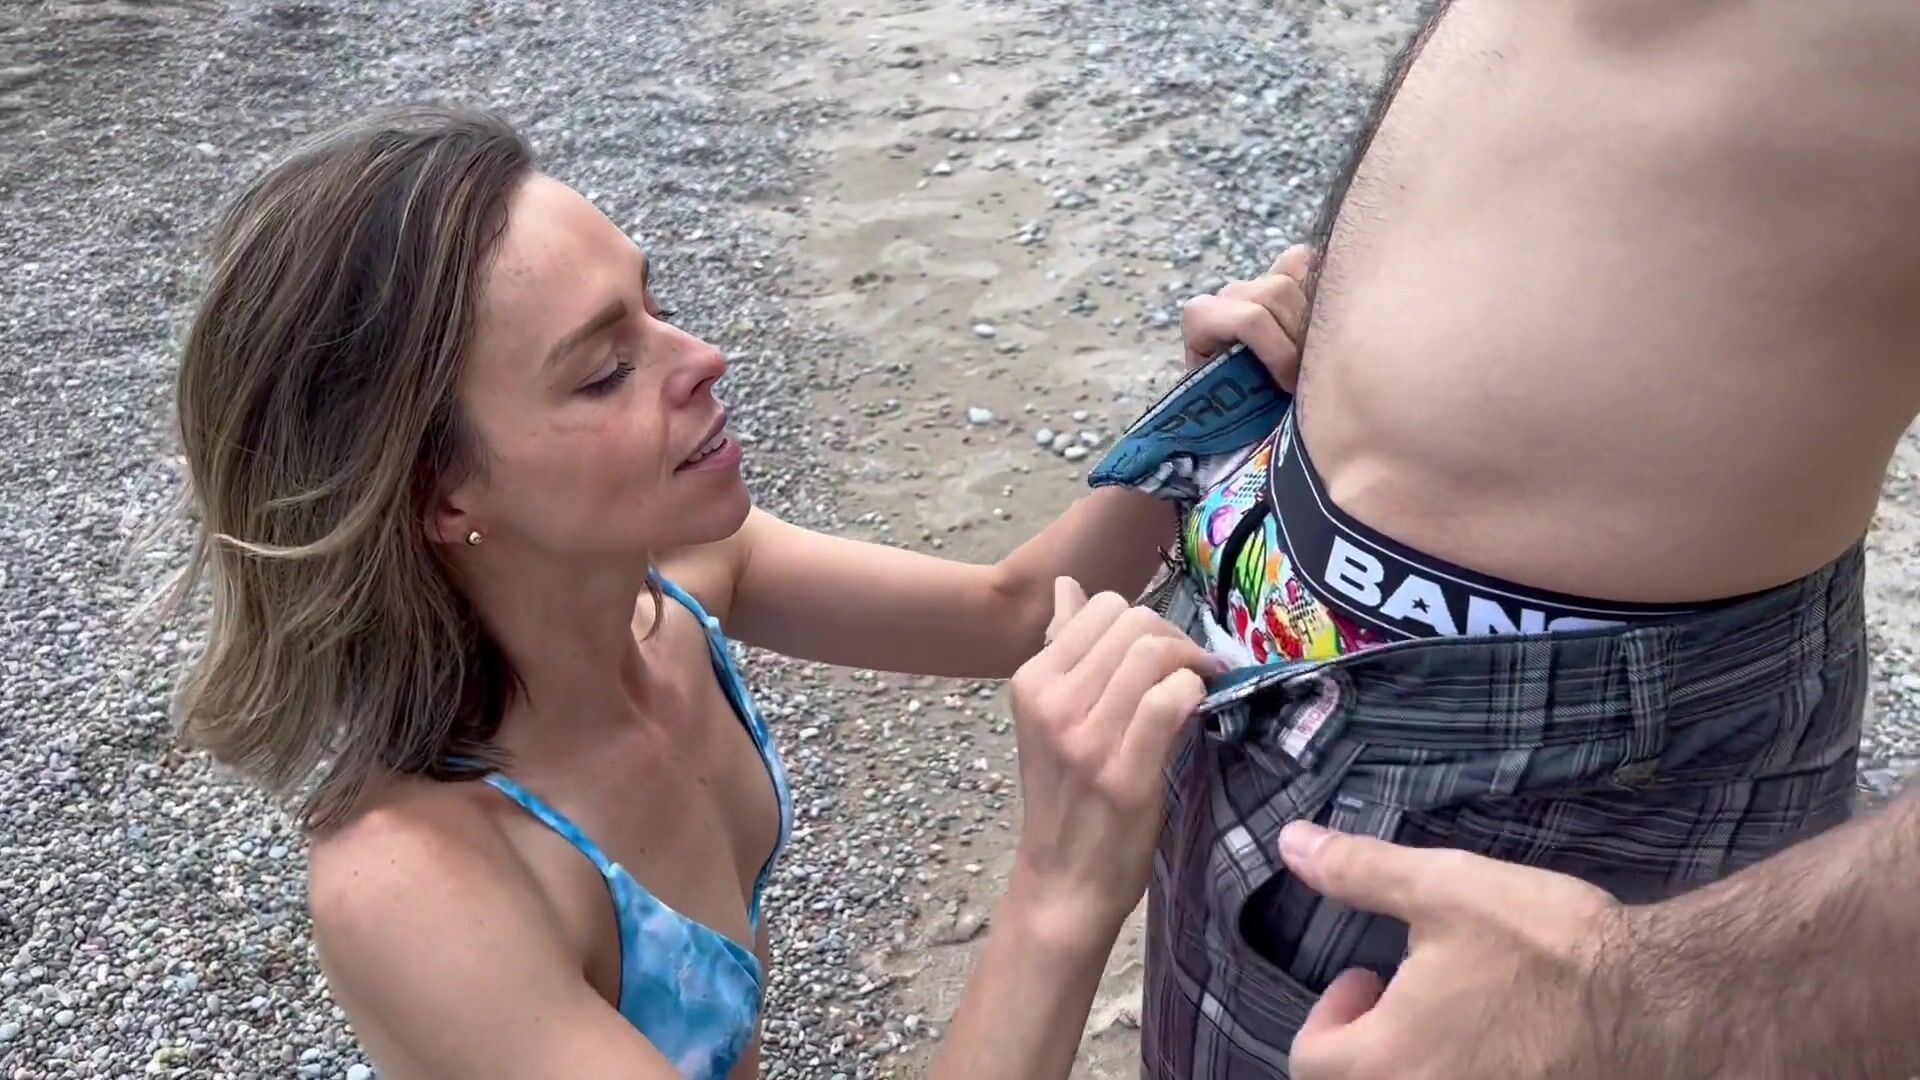 Wife fucks two cocks on public beach in a bikini / Unprotected creampie and facial / Amateur hotwife watch online image image